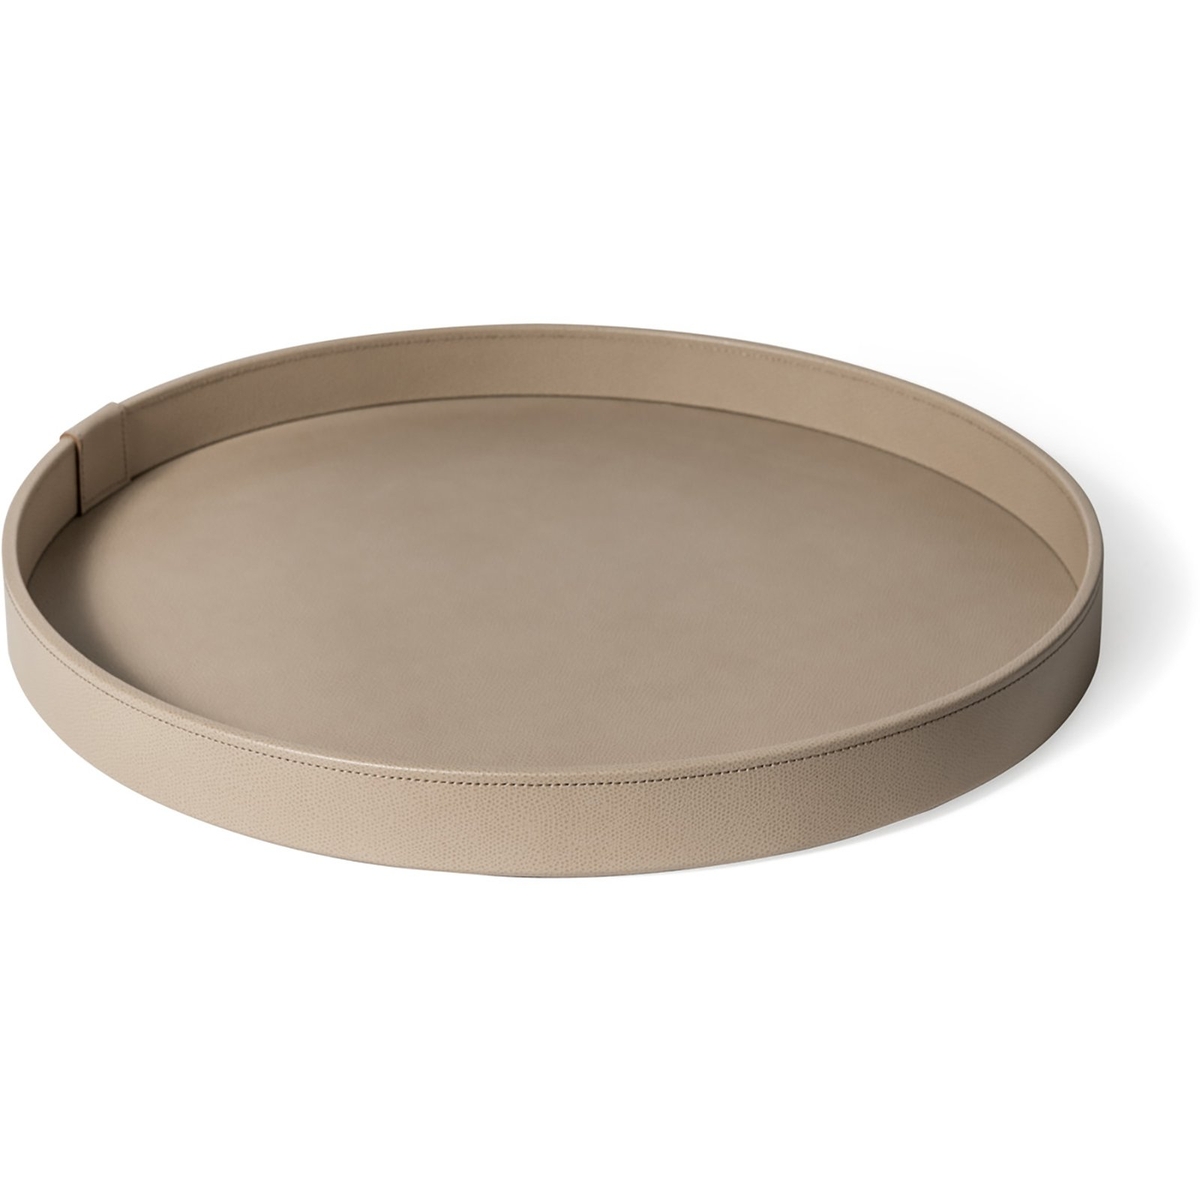 Gea Round Tray, Taupe